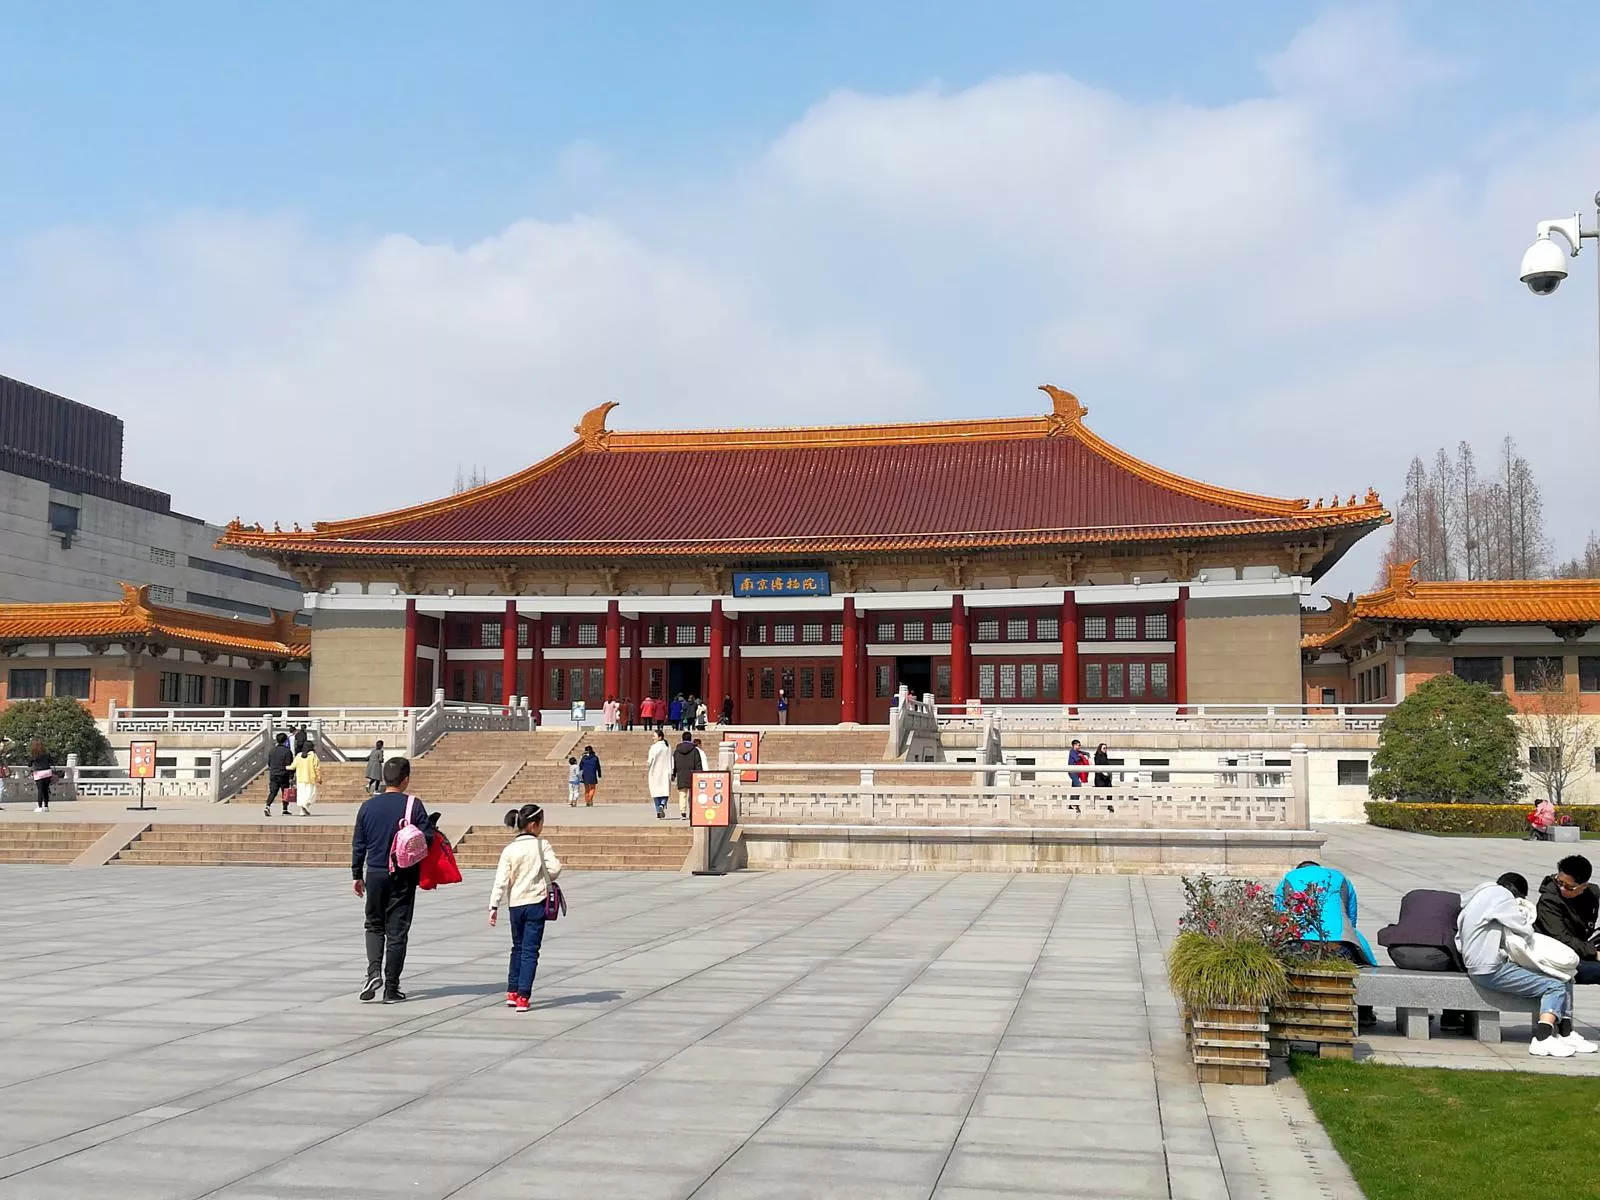 The Nanjing Museum in China, East Asia | Museums - Rated 3.6